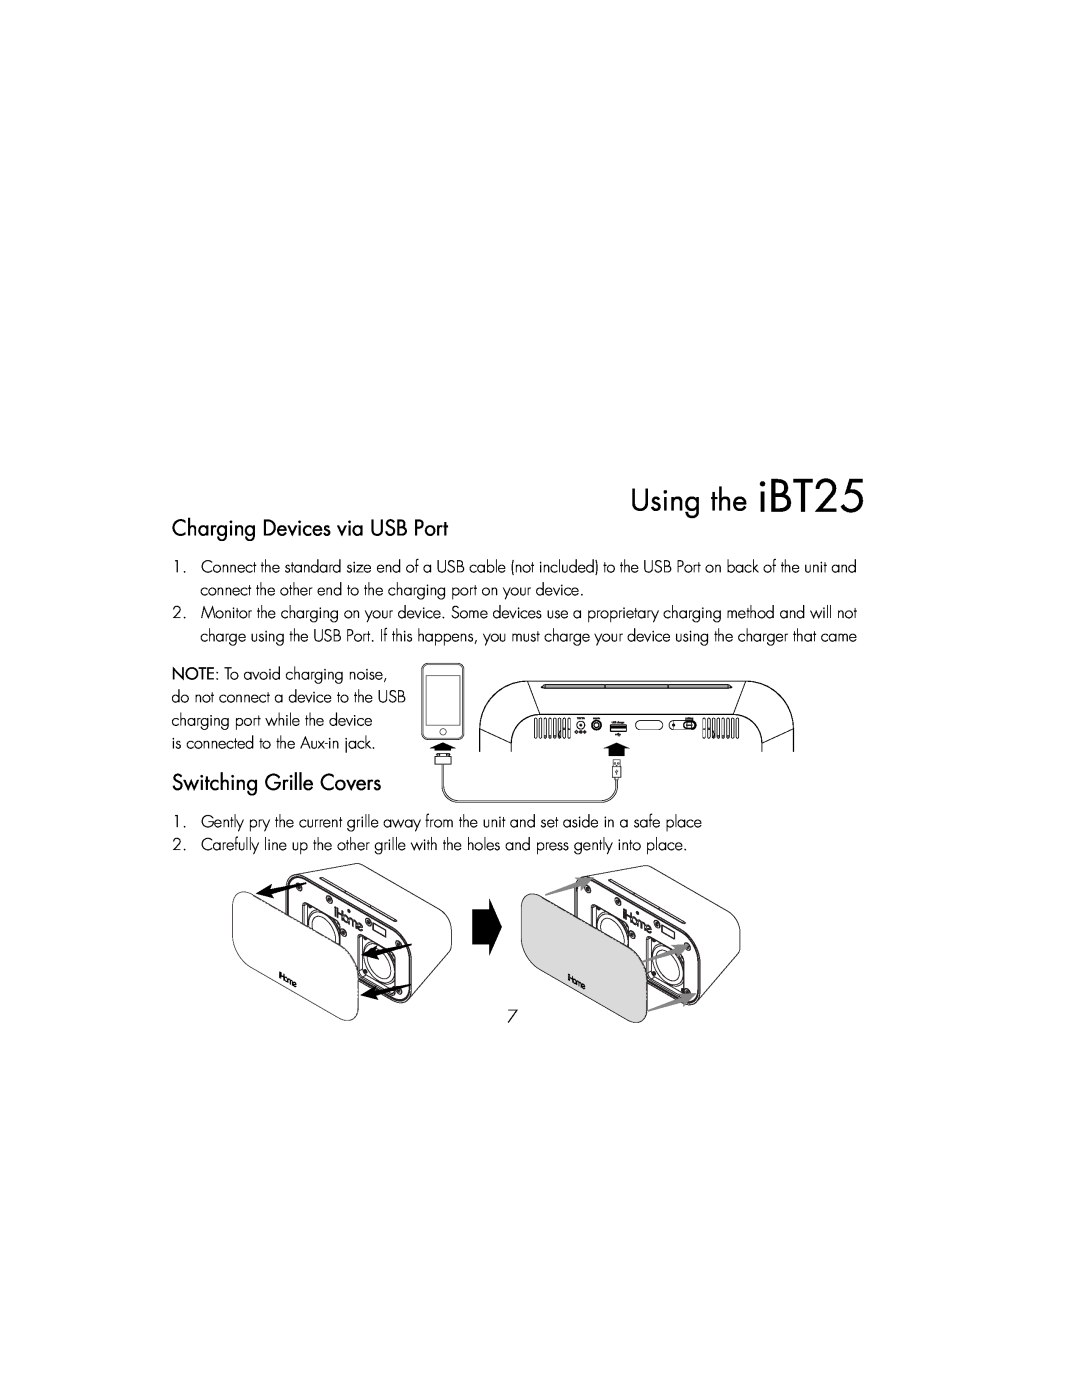 iHome IBT25BC instruction manual Charging Devices via USB Port, Switching Grille Covers, Using the iBT25 